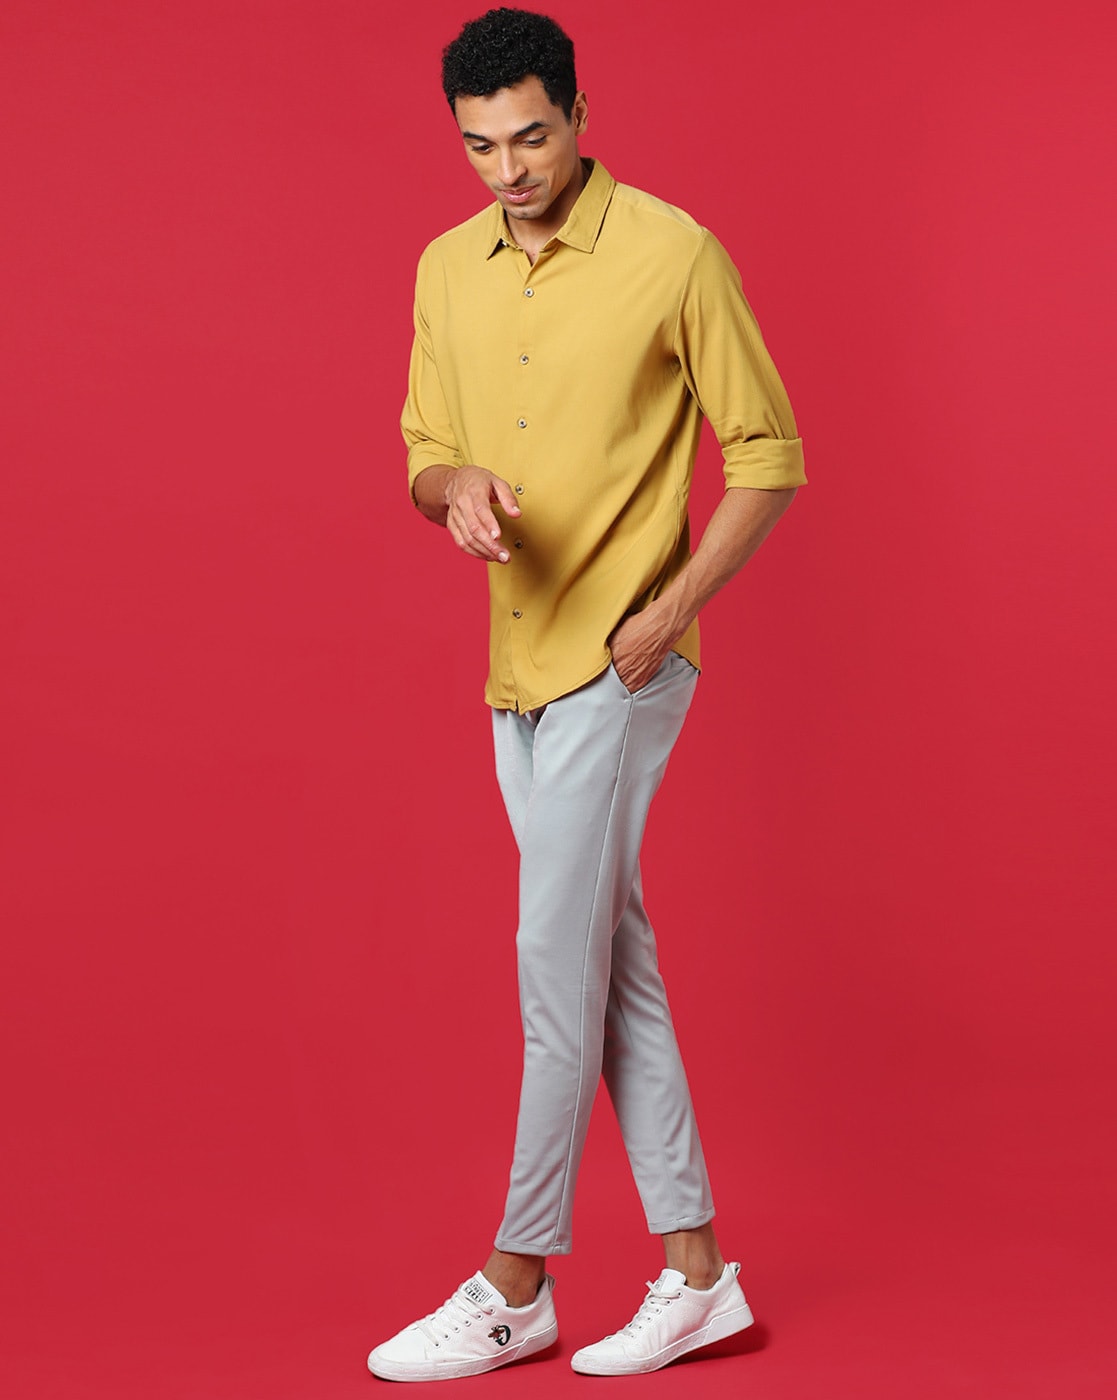 Yellow Auto Shirt paired with Stylish Red pants top it off with snazzy Red  Bow tie #fabricnh44 #fabricnh44dress #fabricnh44clothing #Ti... | Instagram